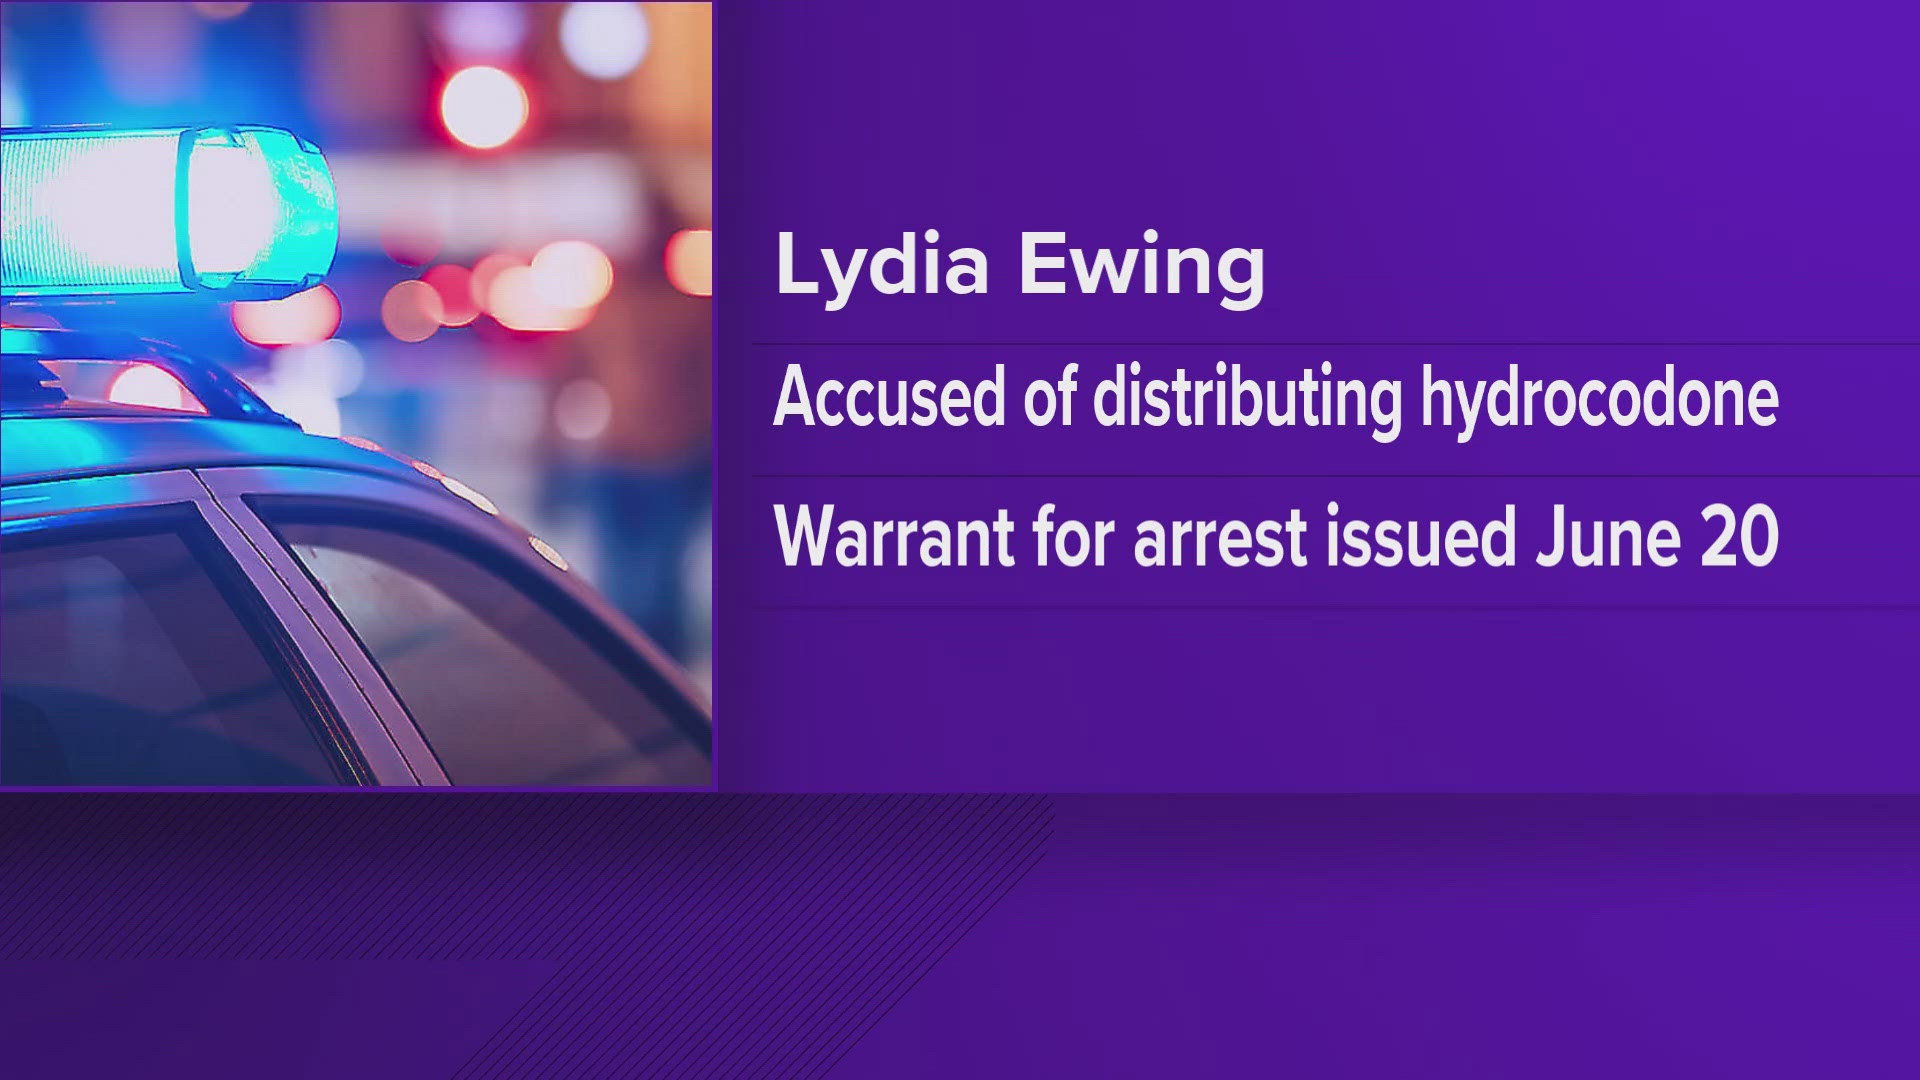 A warrant for detention deputy Lydia Ewing's arrest was issued on June 20, according to court filings.o